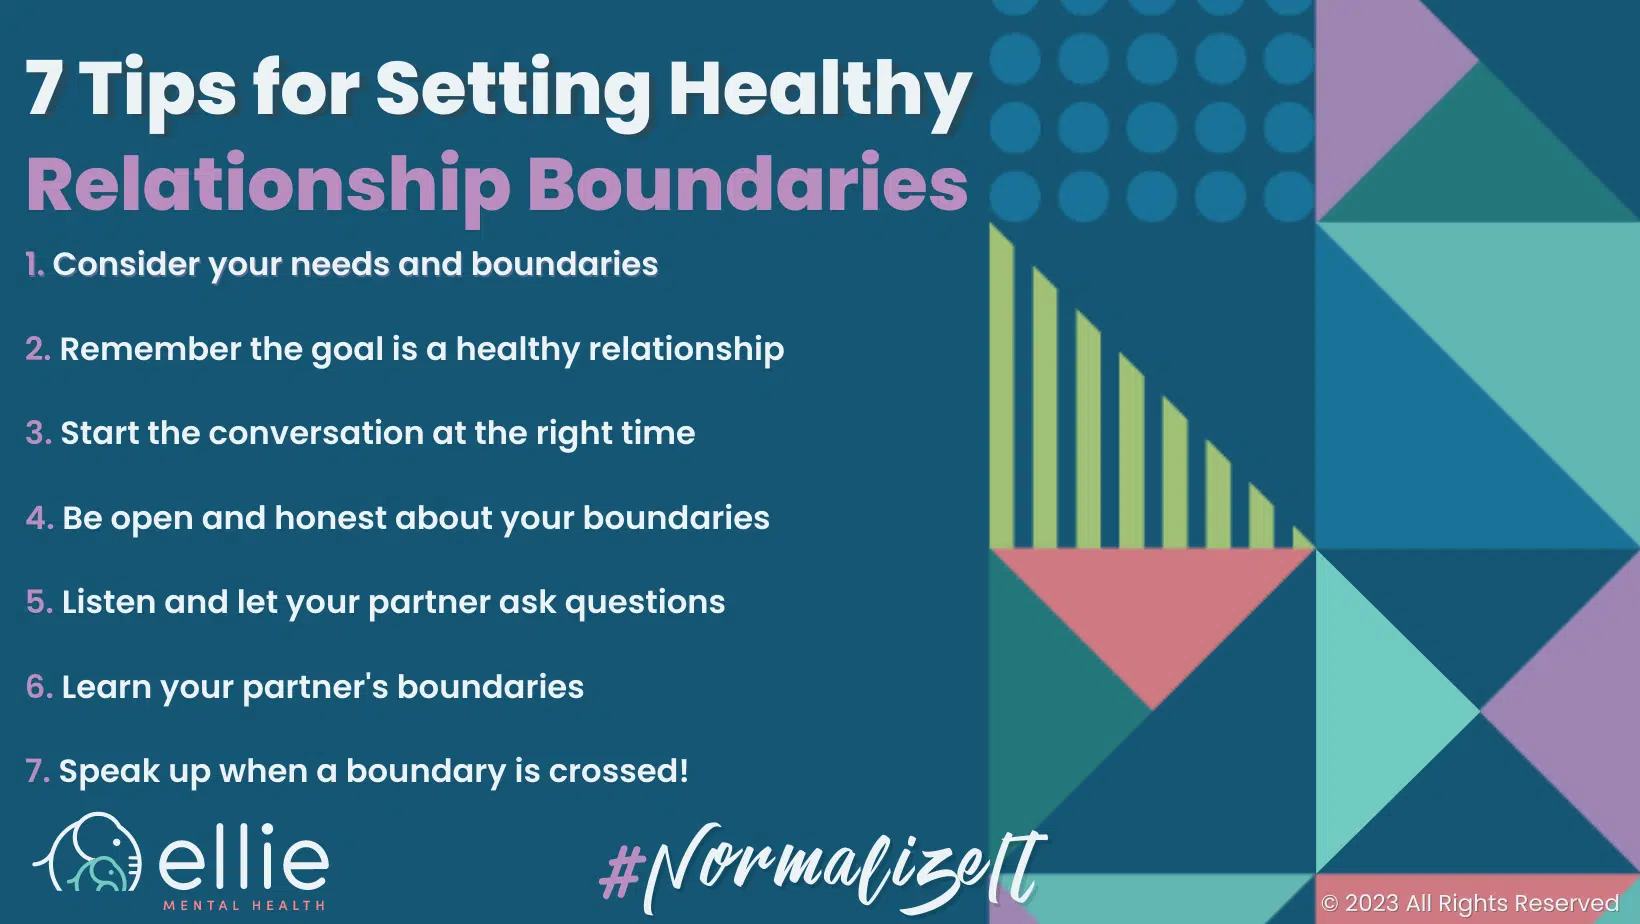 7 Tips for Setting Healthy Relationship Boundaries Infographic